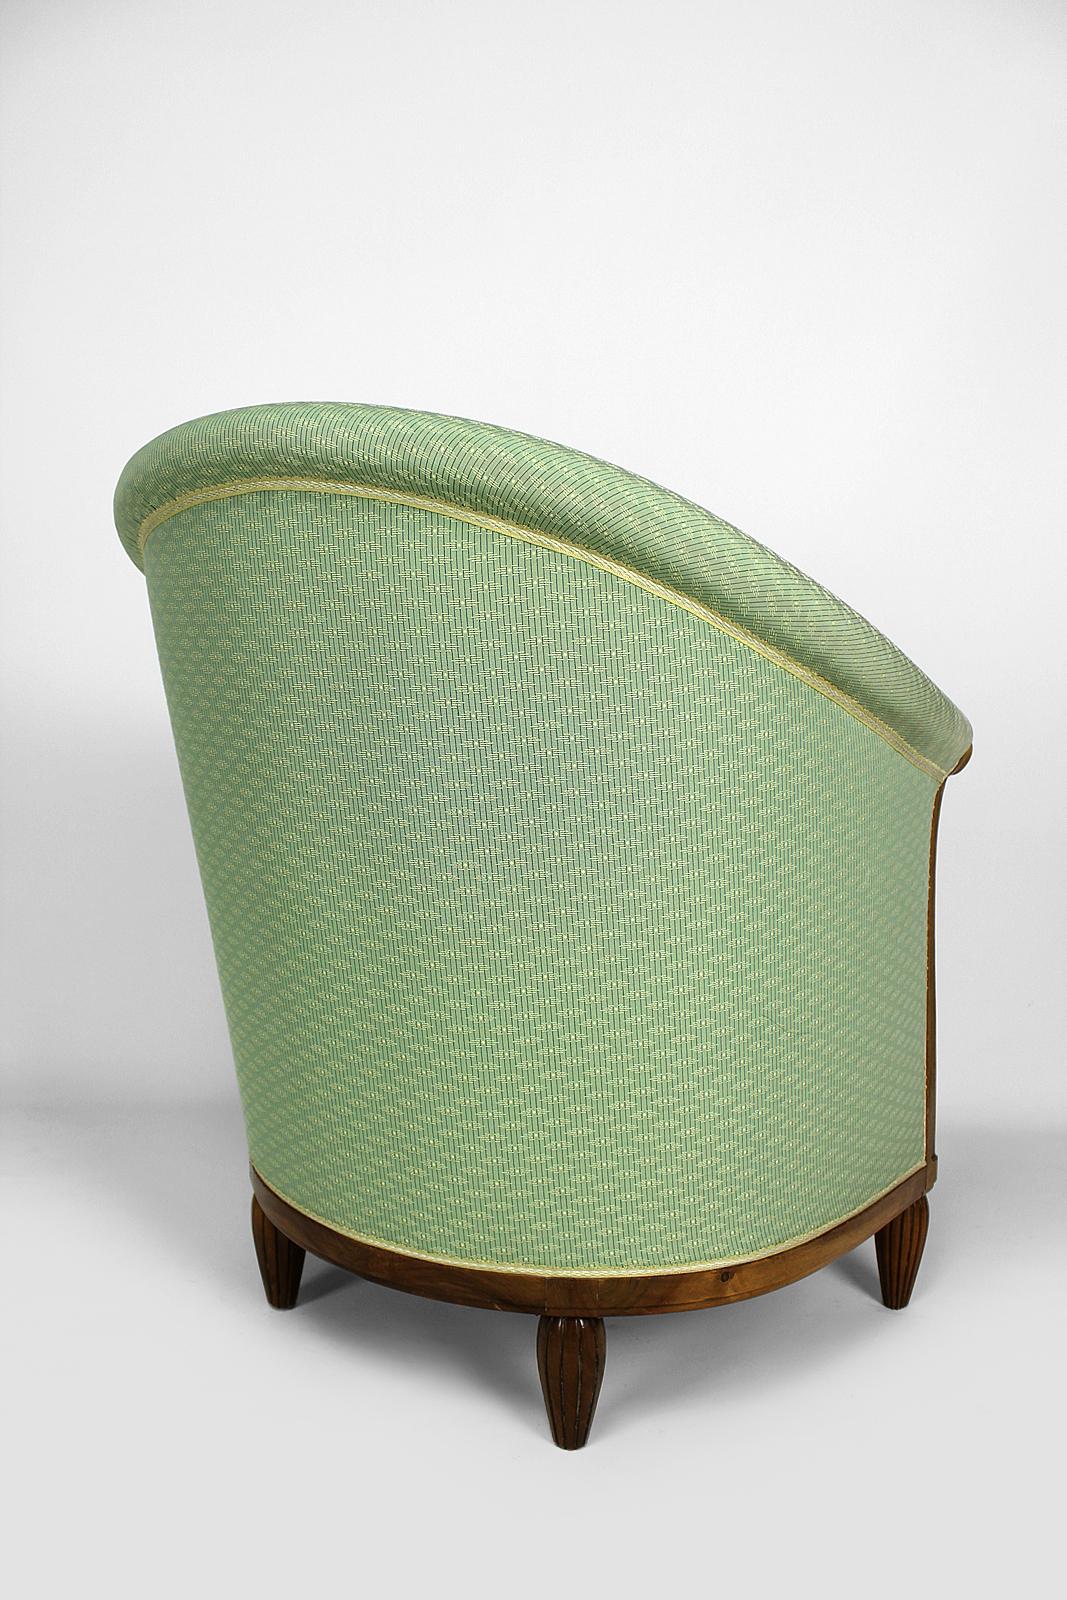 Fabric Art Deco Armchair by Ateliers Gauthier-Poinsignon in walnut, circa 1920-1930 For Sale